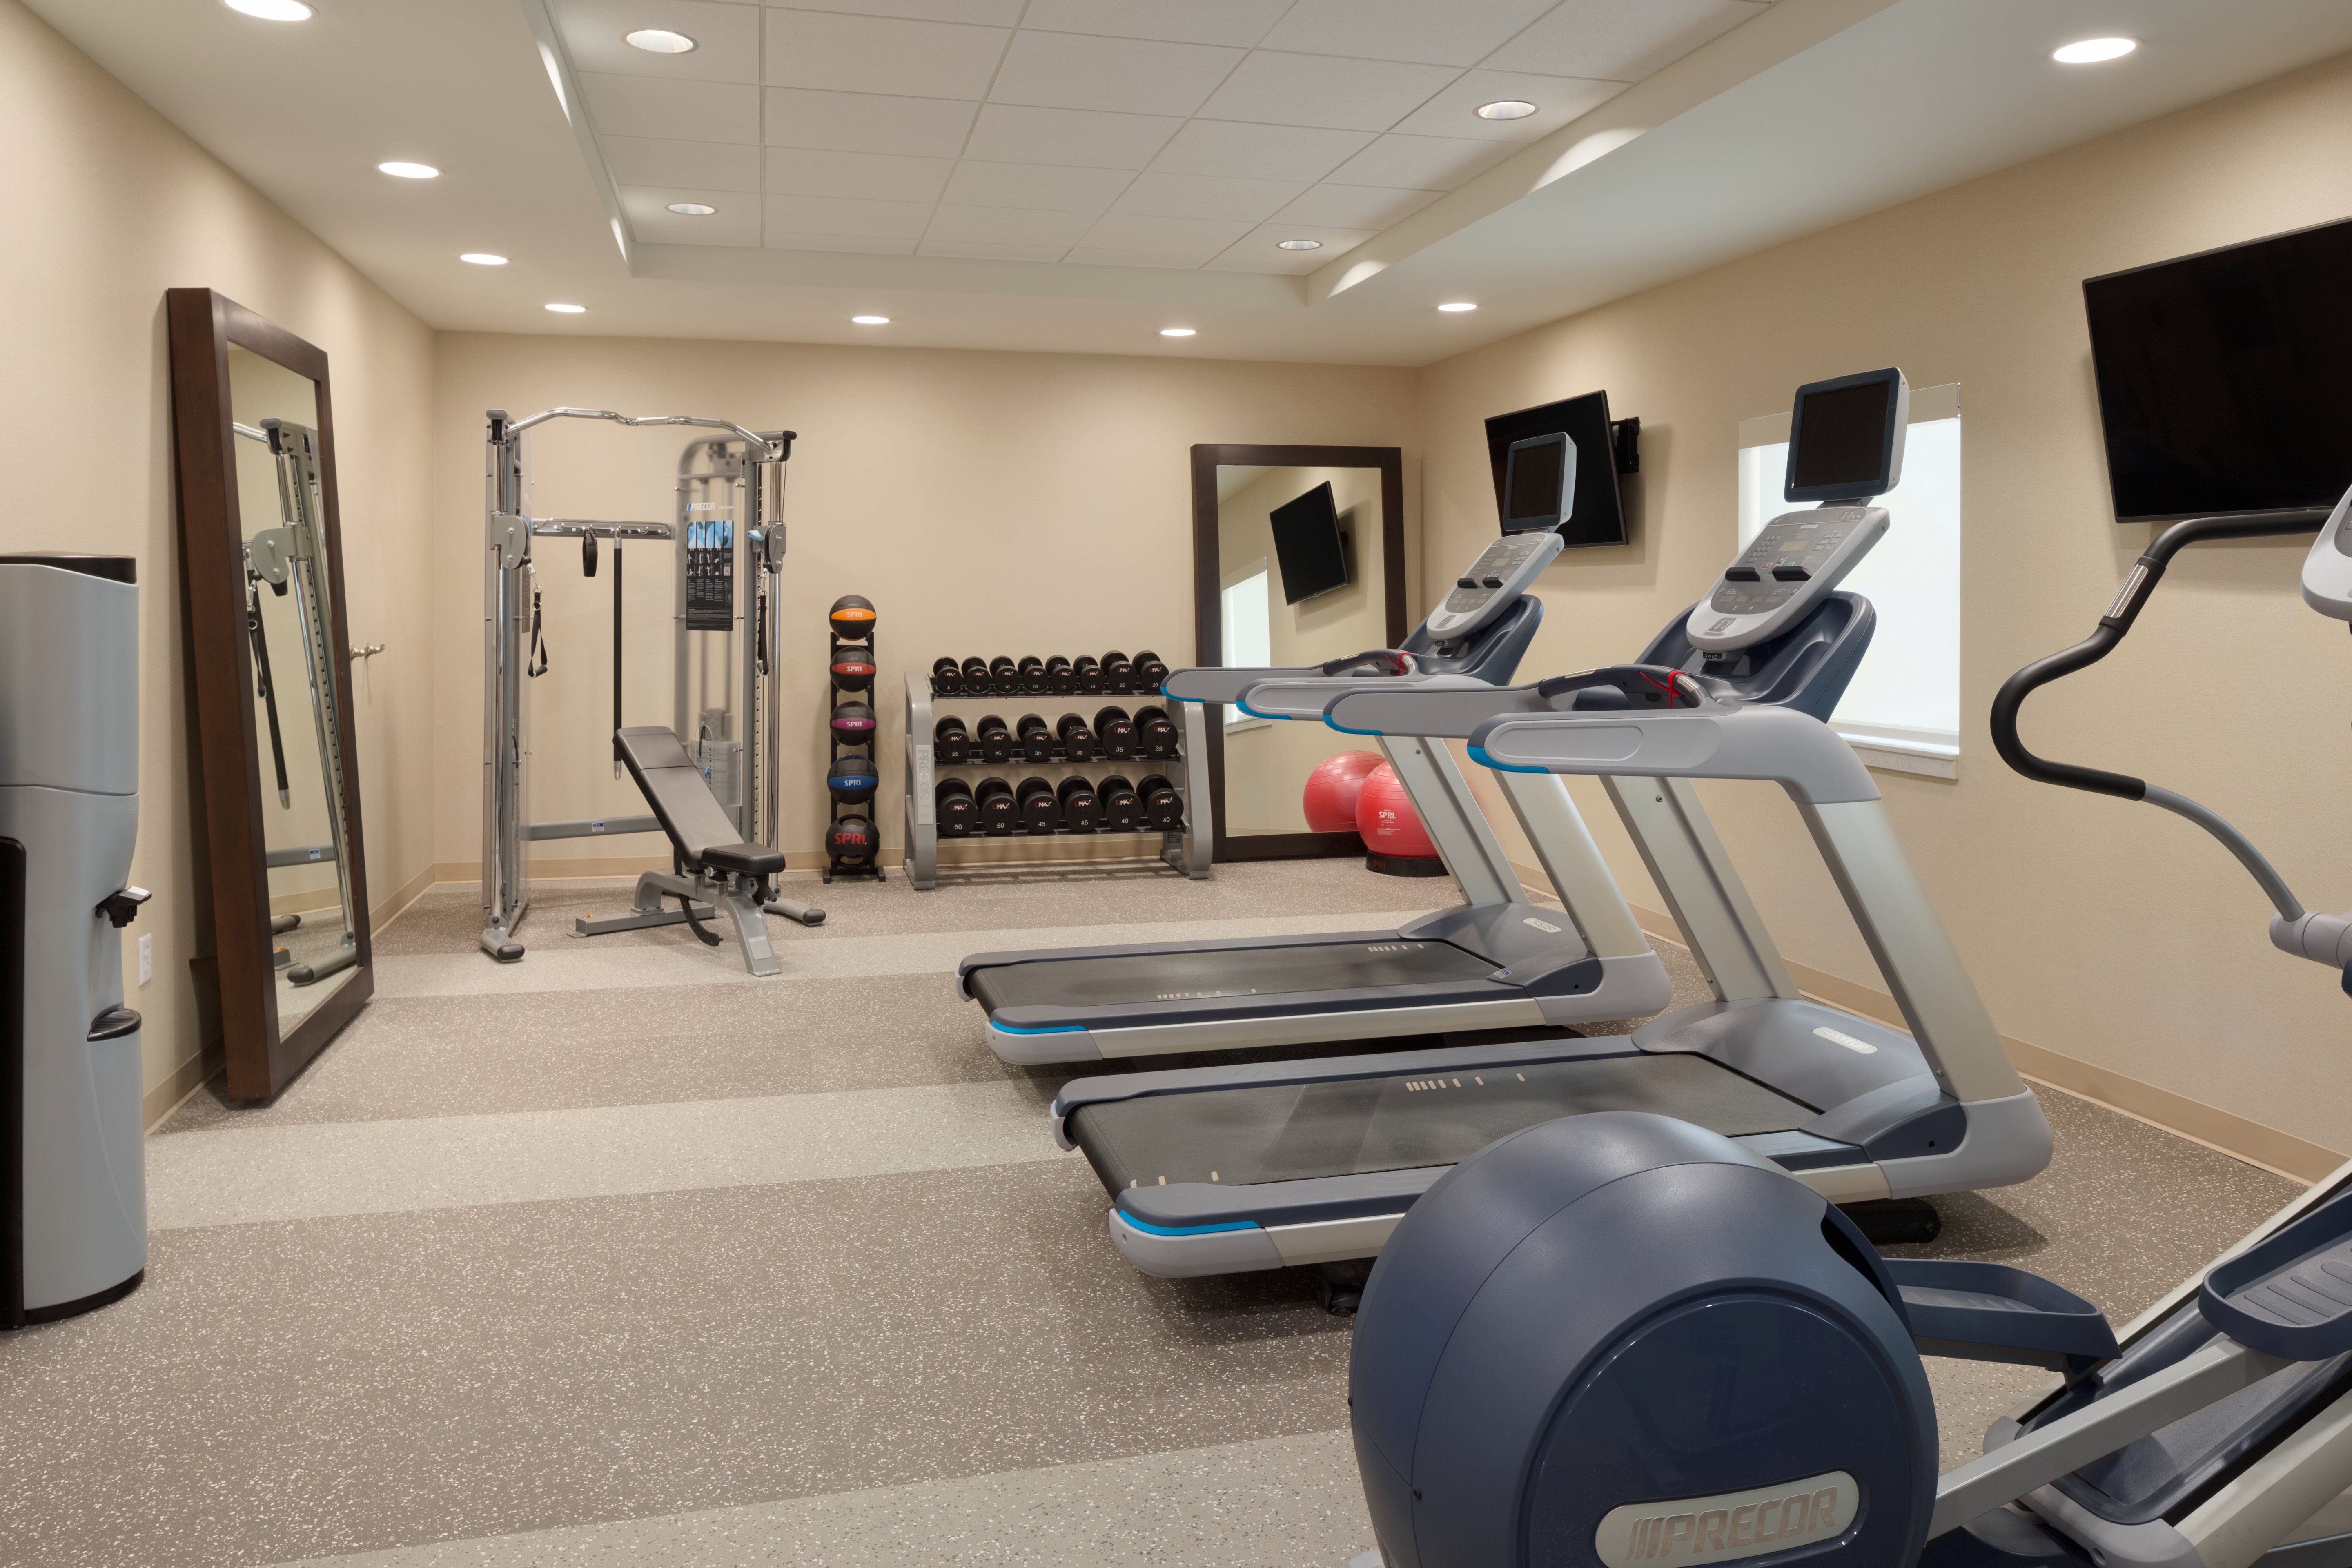 FitFitness Center With Water Cooler, Two Large Mirrors, Weight Machine, Weight Balls, Free Weights, Red Exercise Ball, Two TVs and Cardio Equipment